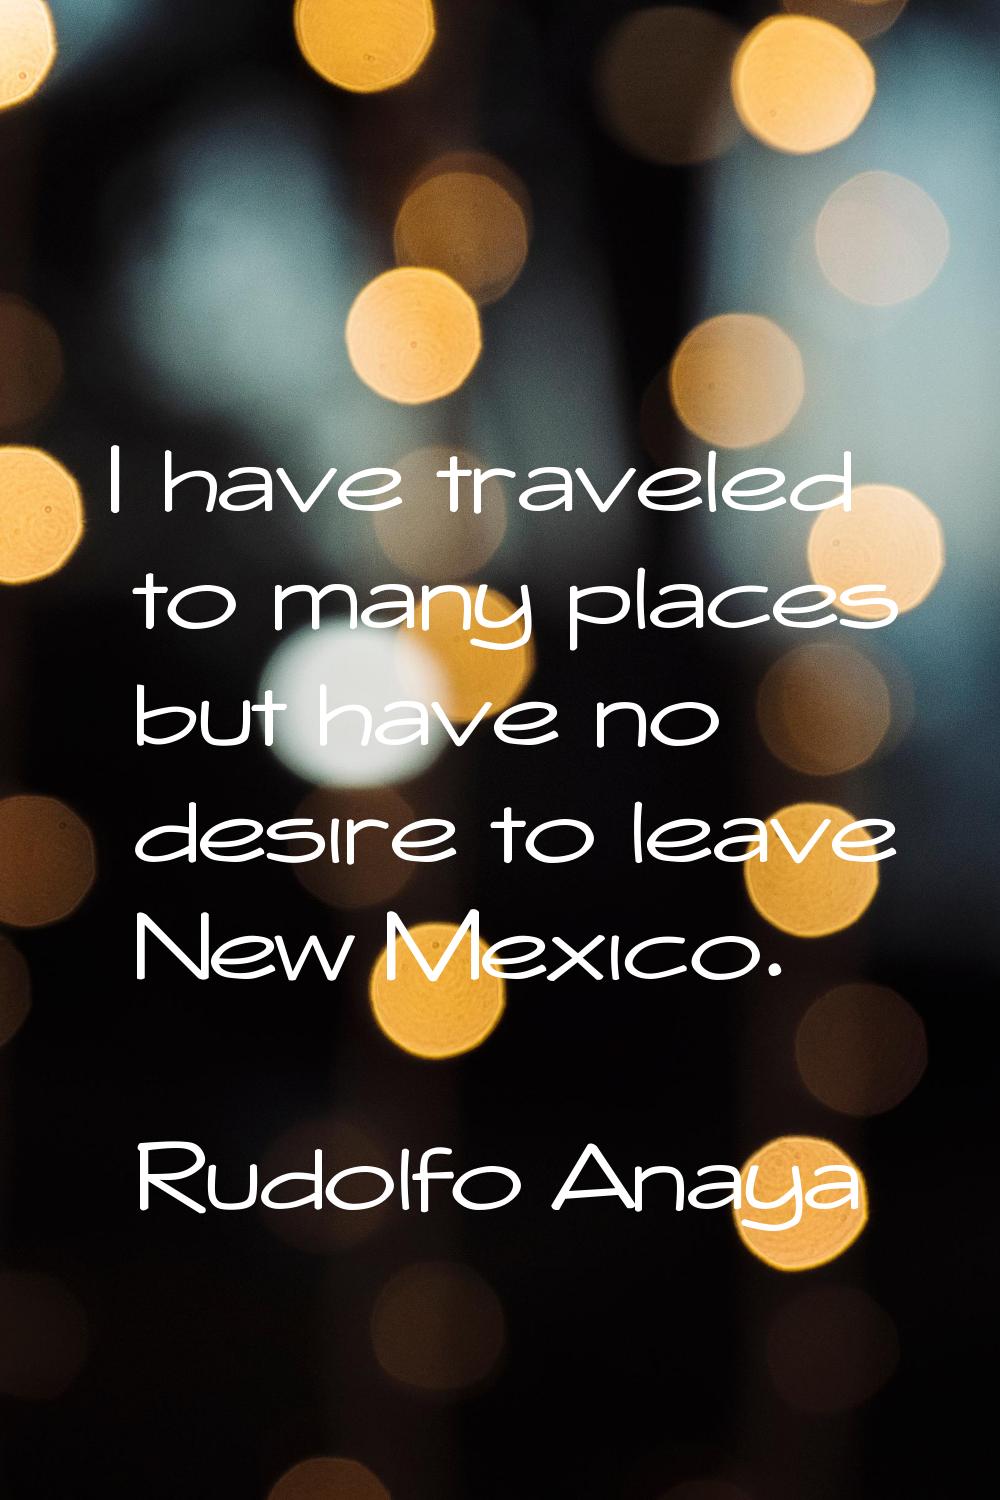 I have traveled to many places but have no desire to leave New Mexico.